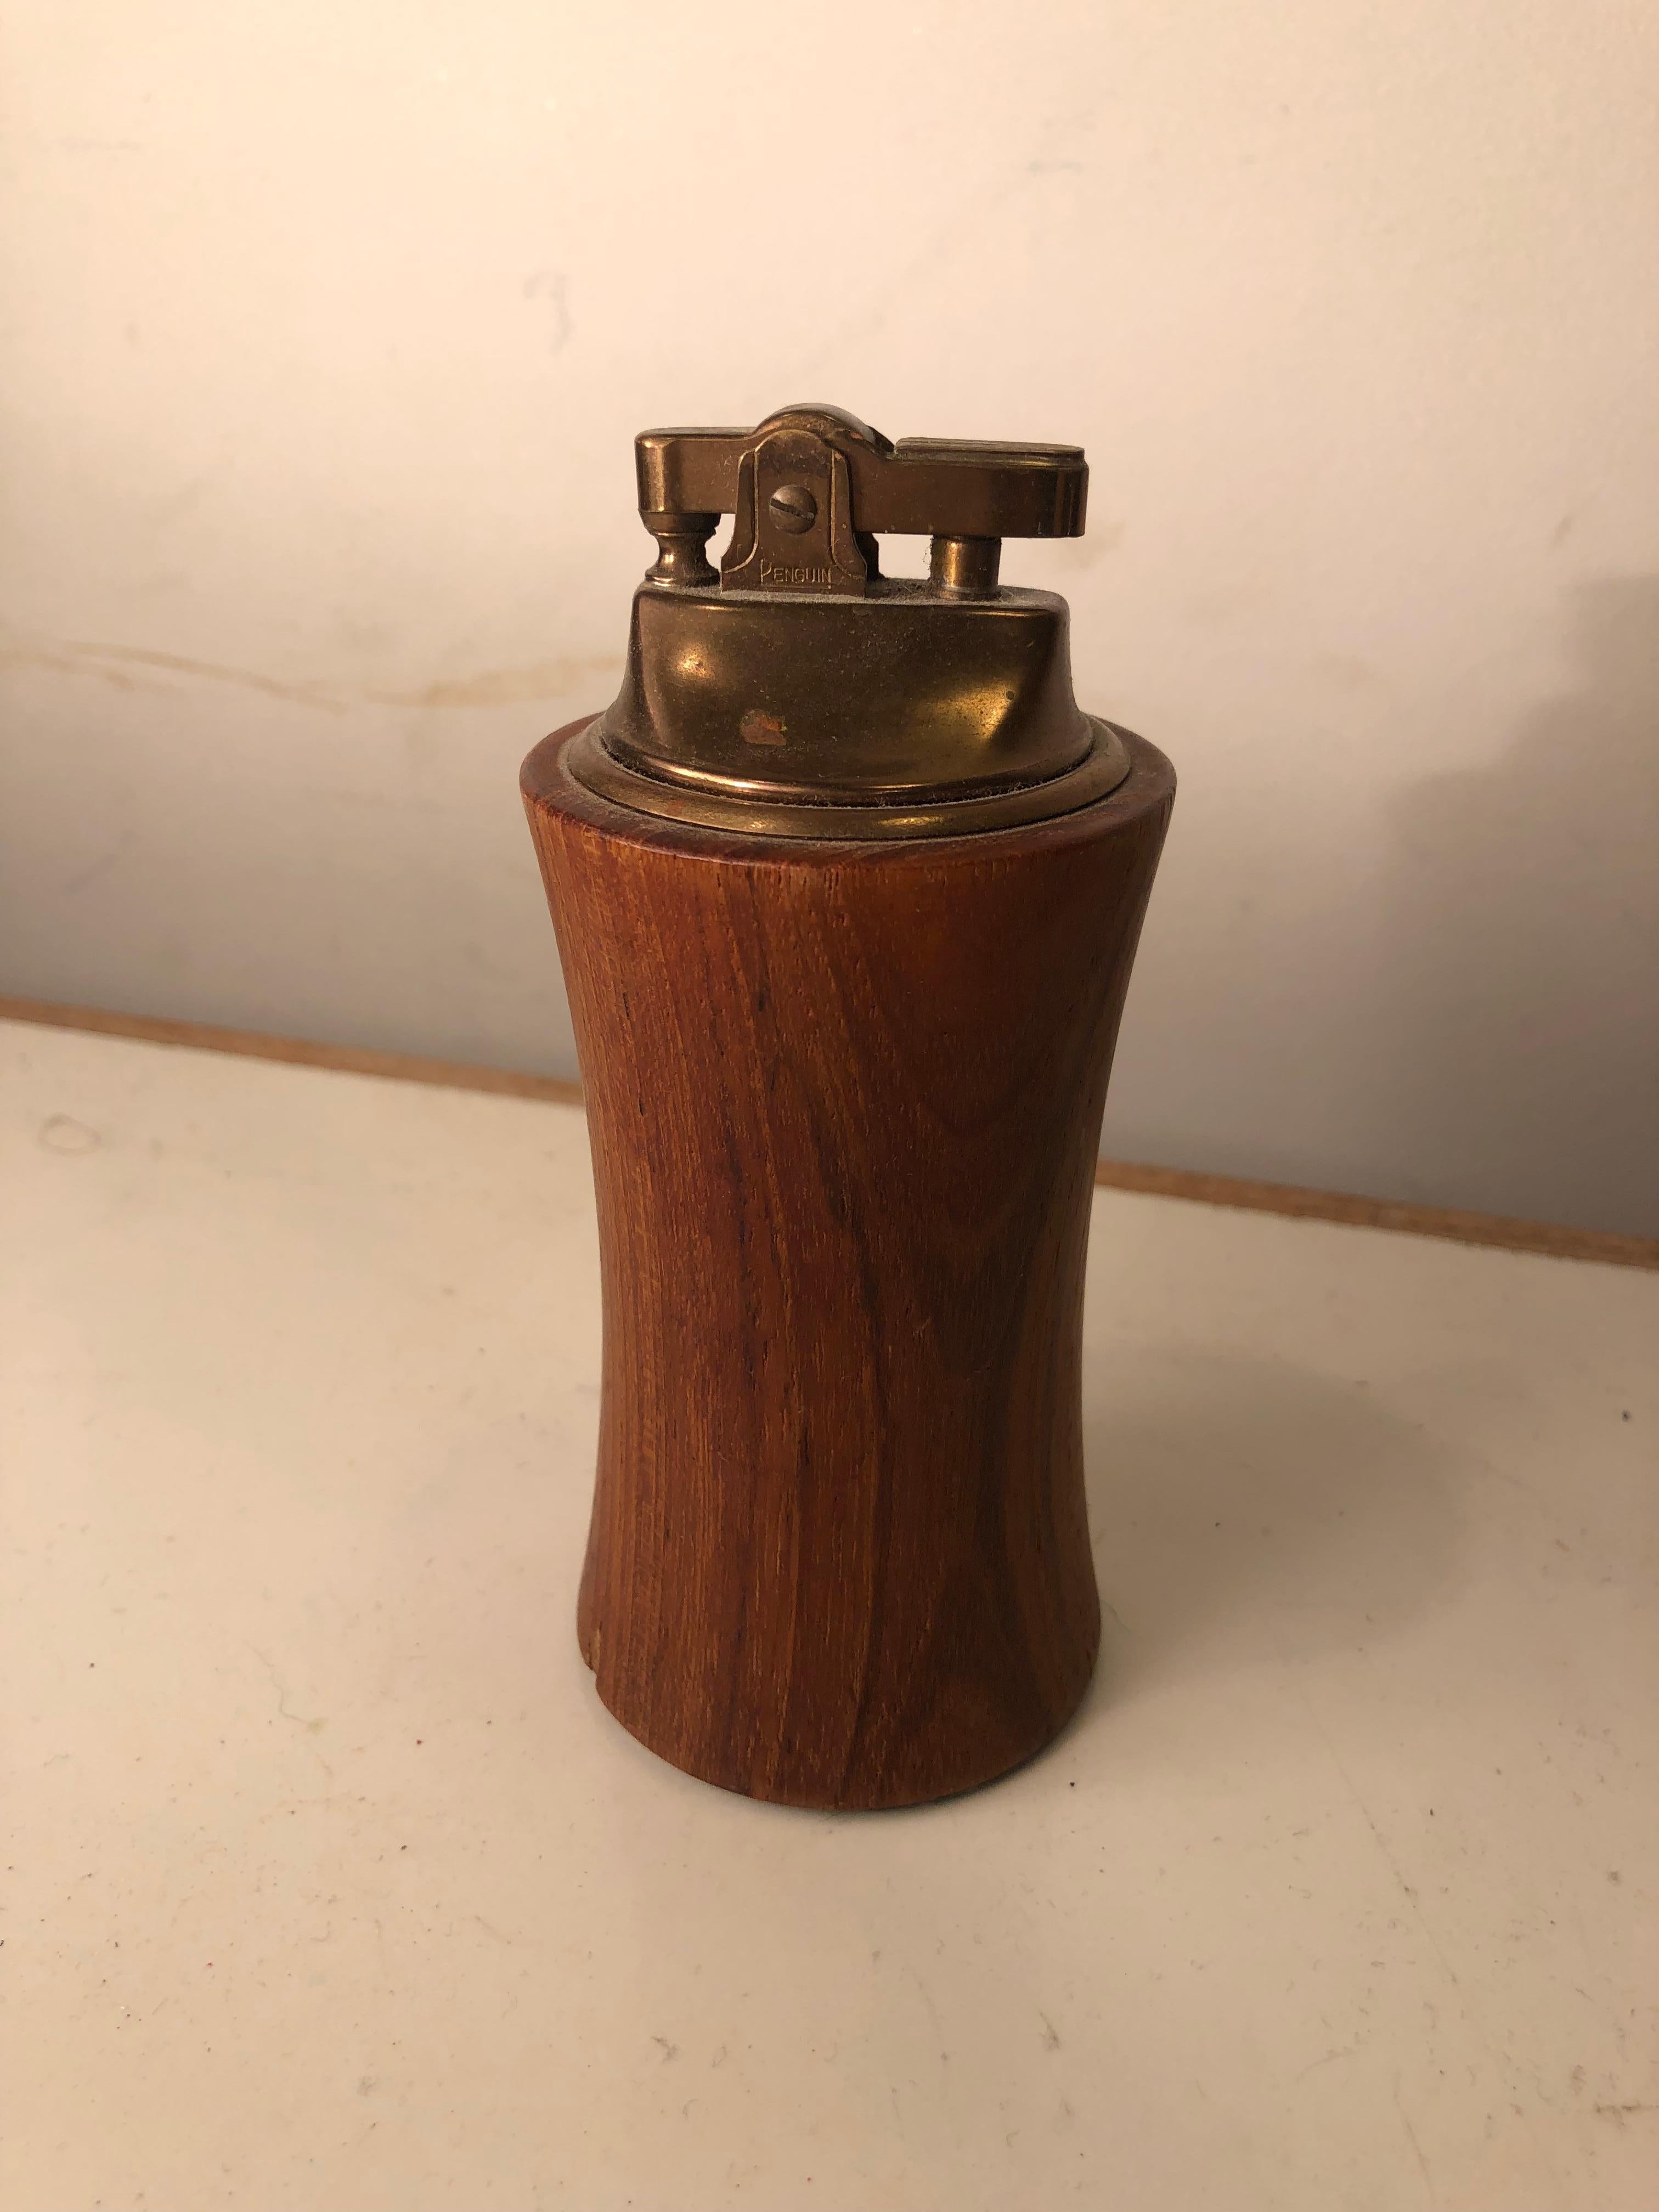 Can’t you picture Don Draper sparking this to light up and one of his lucky strike cigarettes? Hey handsome teak and brass midcentury table or desk lighter. Can be used as object d’art instead of for smoking. Untested.